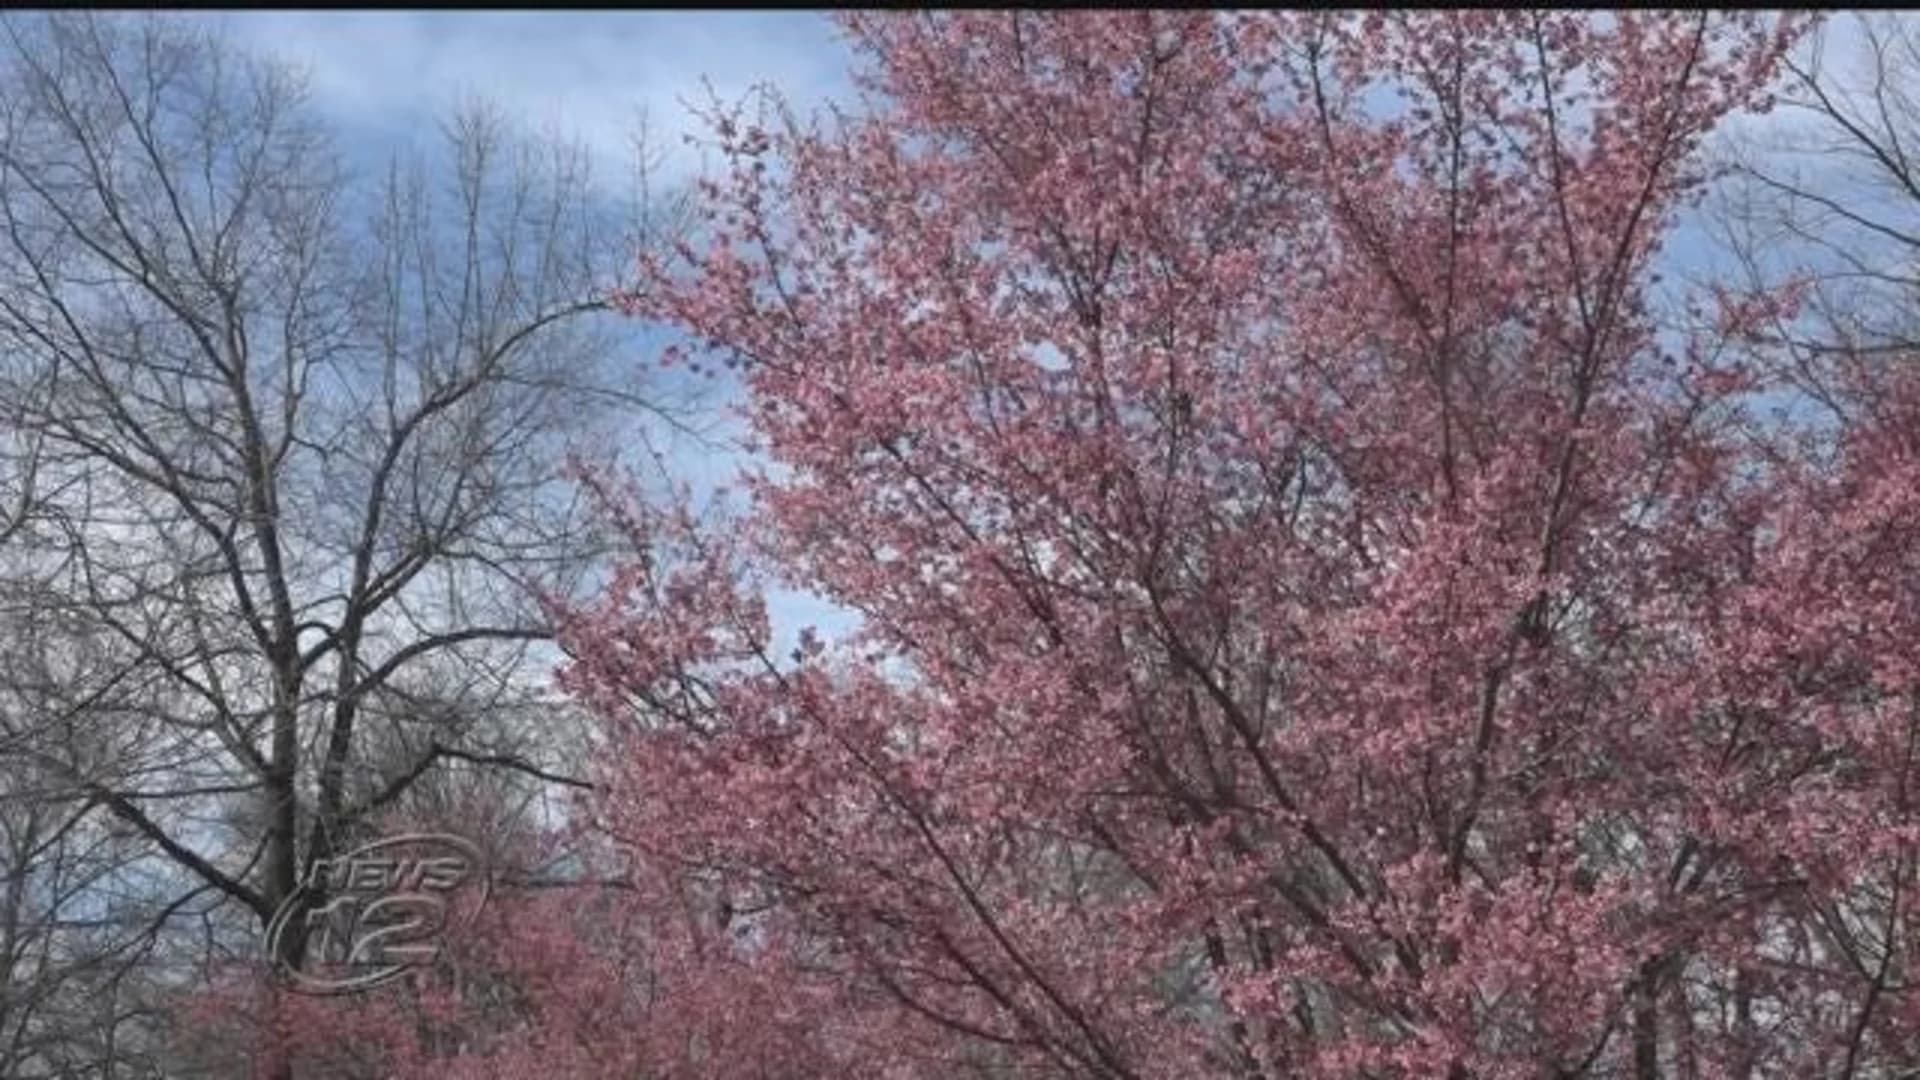 Experts: Allergy season seems to be lengthening over time